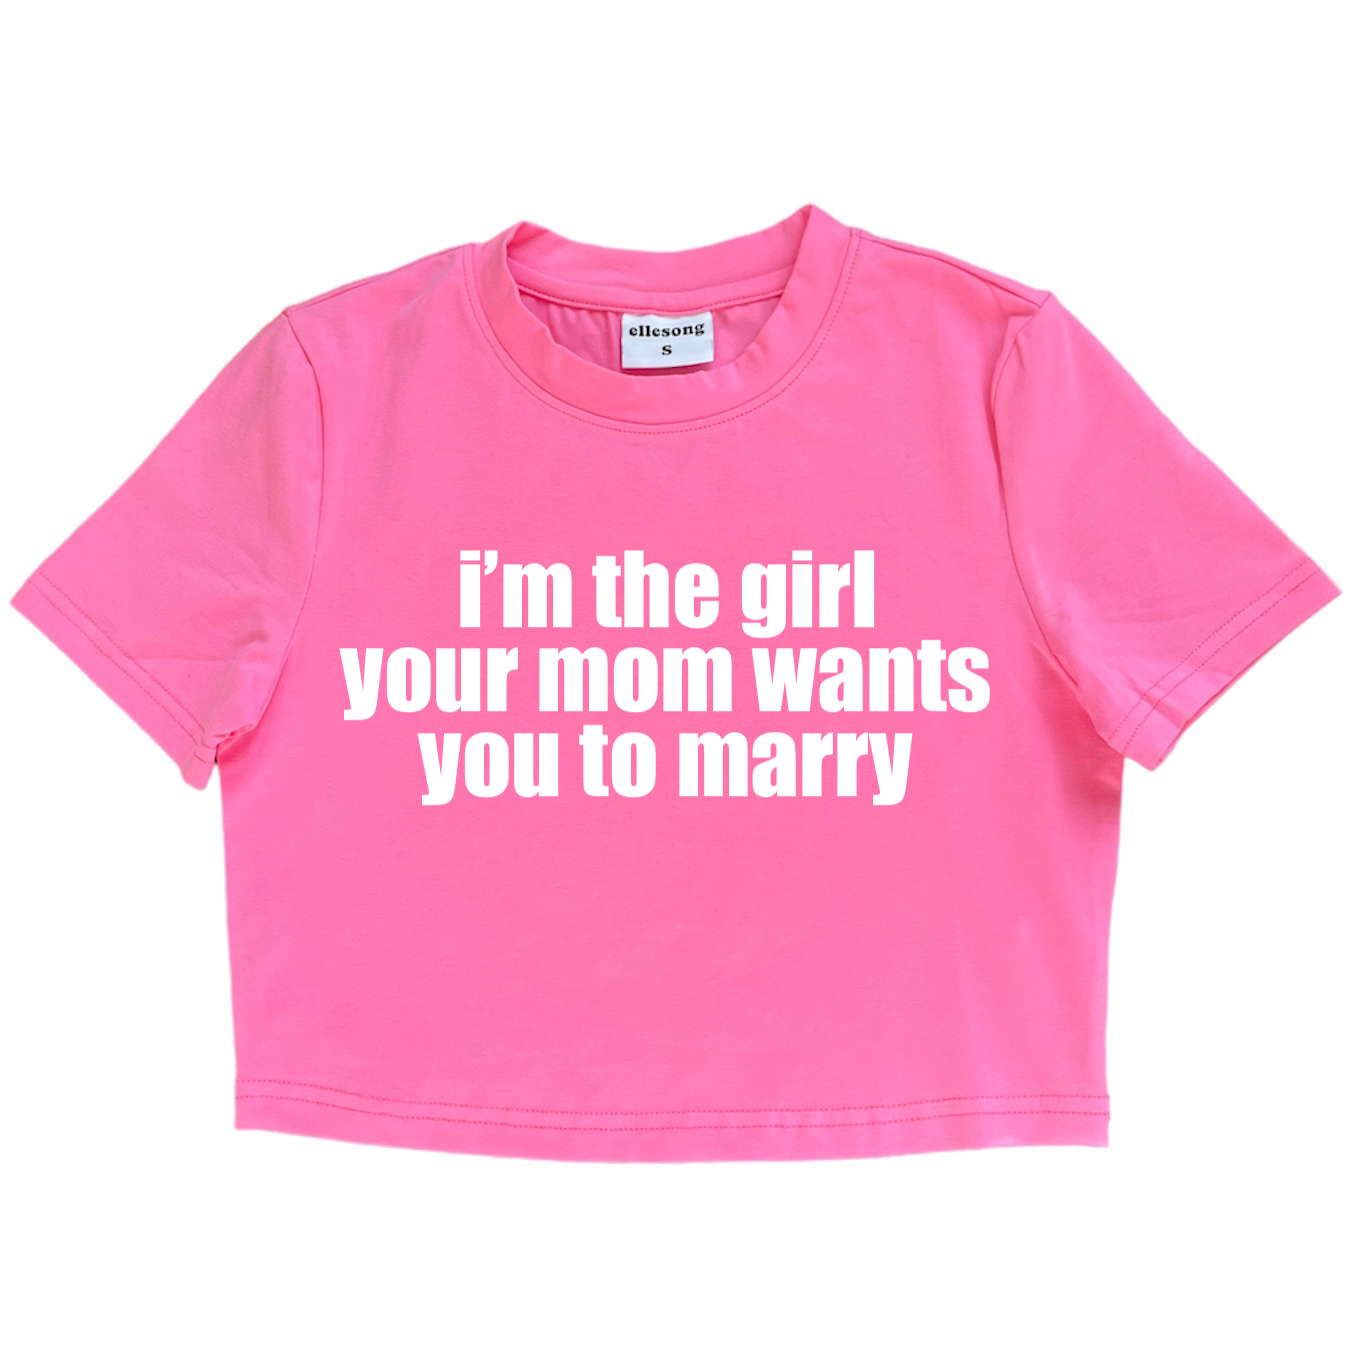 I’m The Girl Your Mom Wants You To Marry Baby Tee